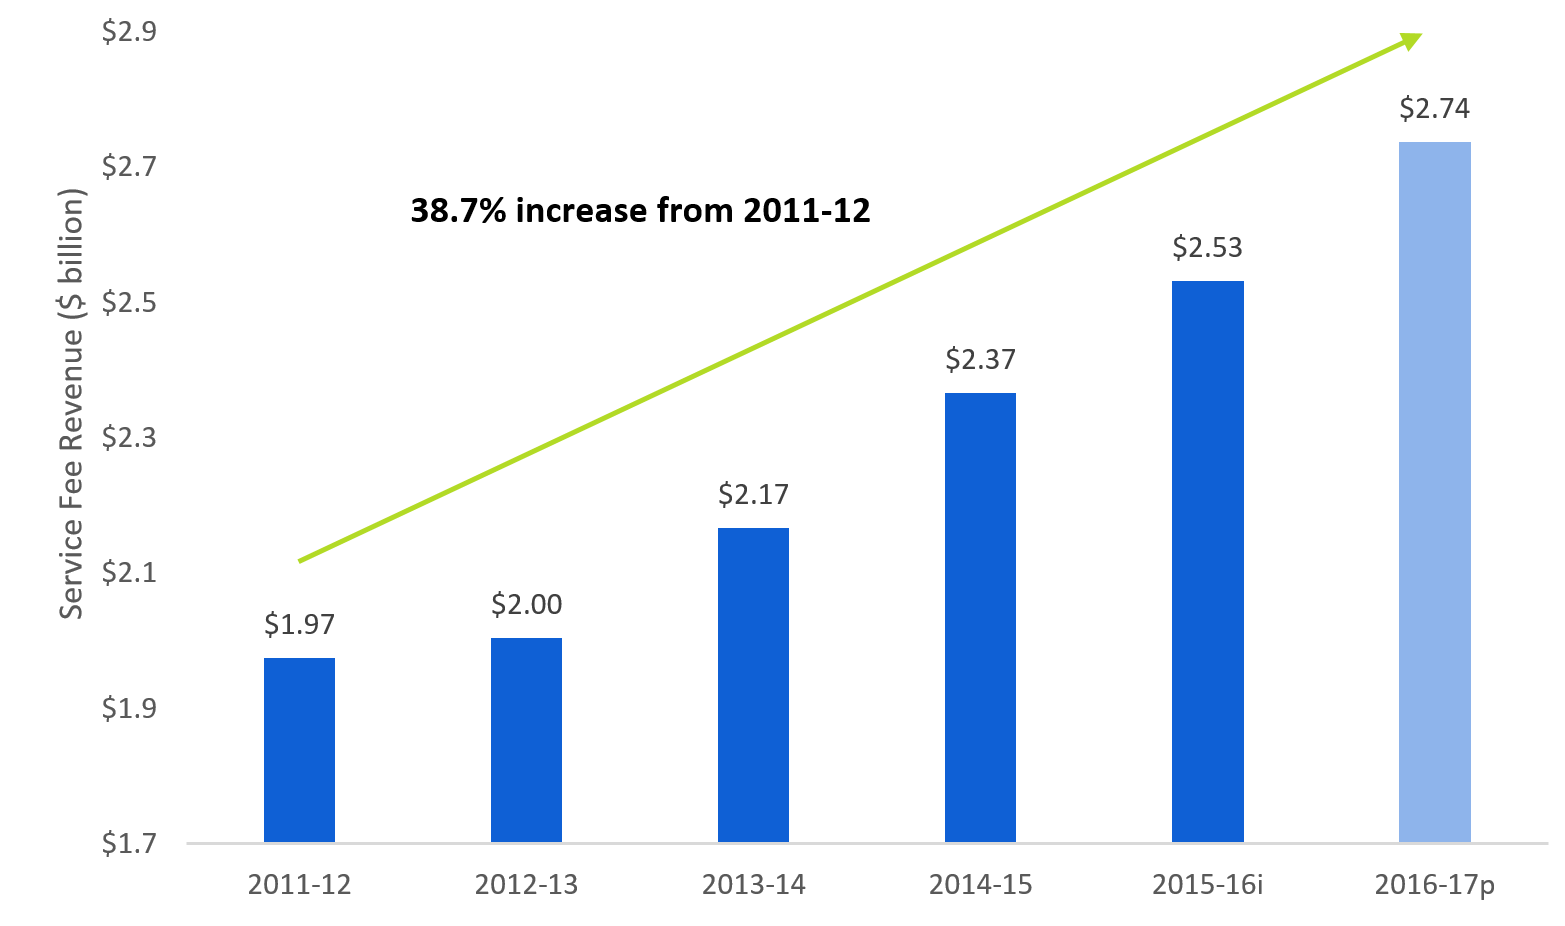 Image: 38.7% increase from 2011-12